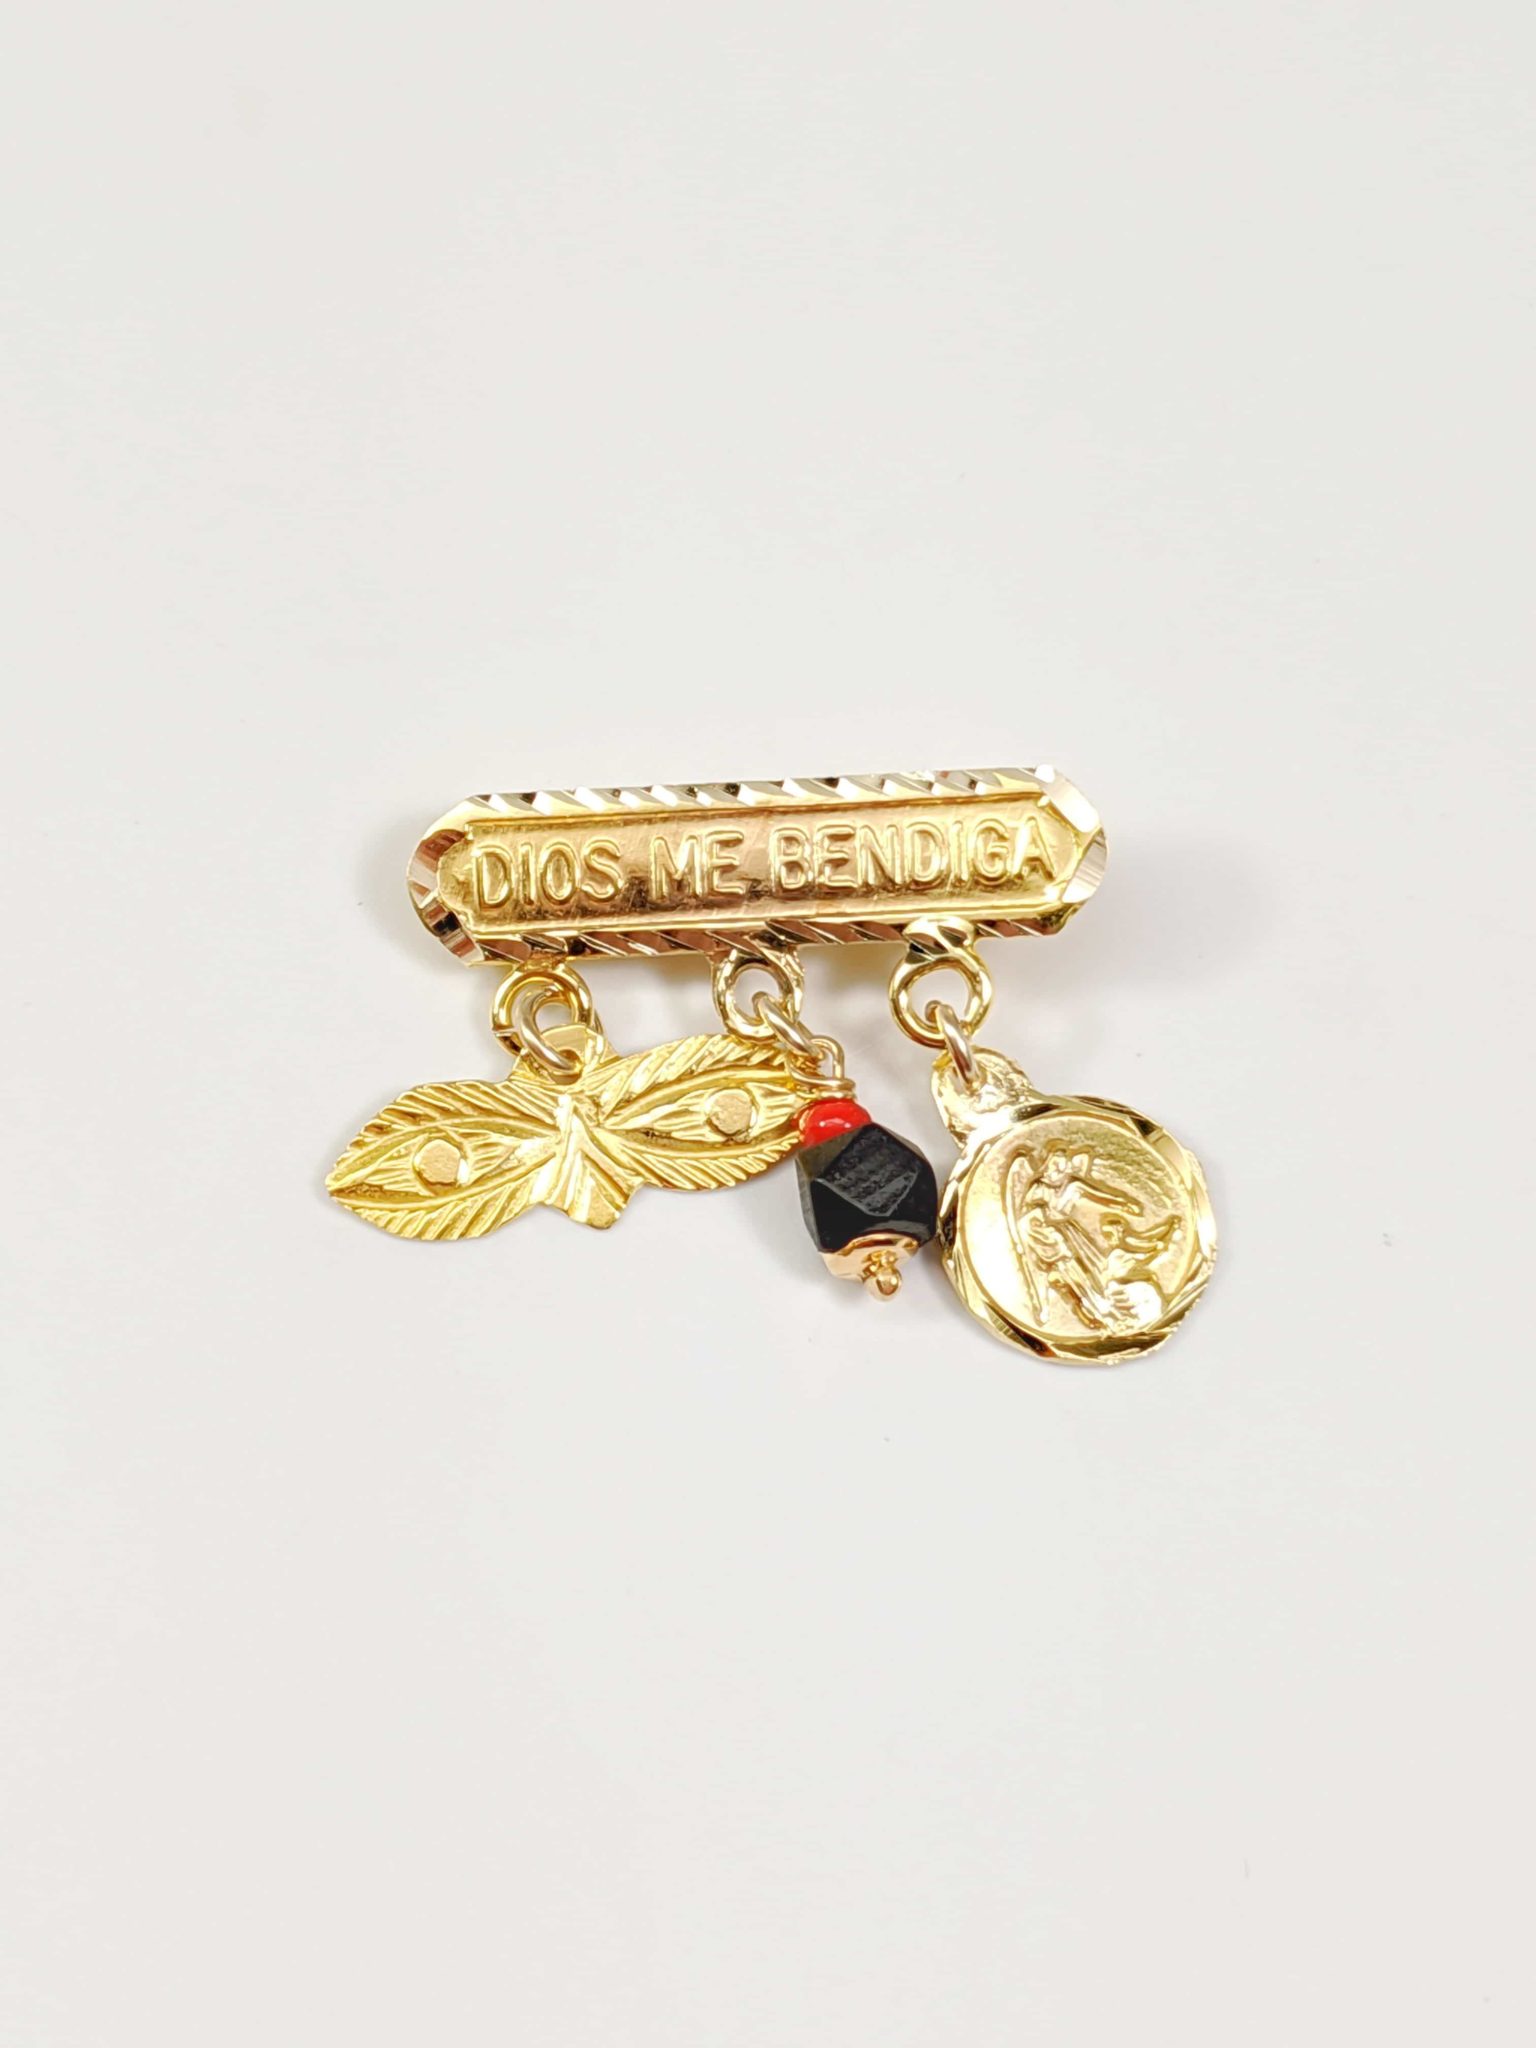 14K Yellow Gold "Dios Me Bendiga" Pin Brooch With Hanging Genuine Black Azabache Red Coral Ojos de Santa Lucia Eyes and Angel Medal